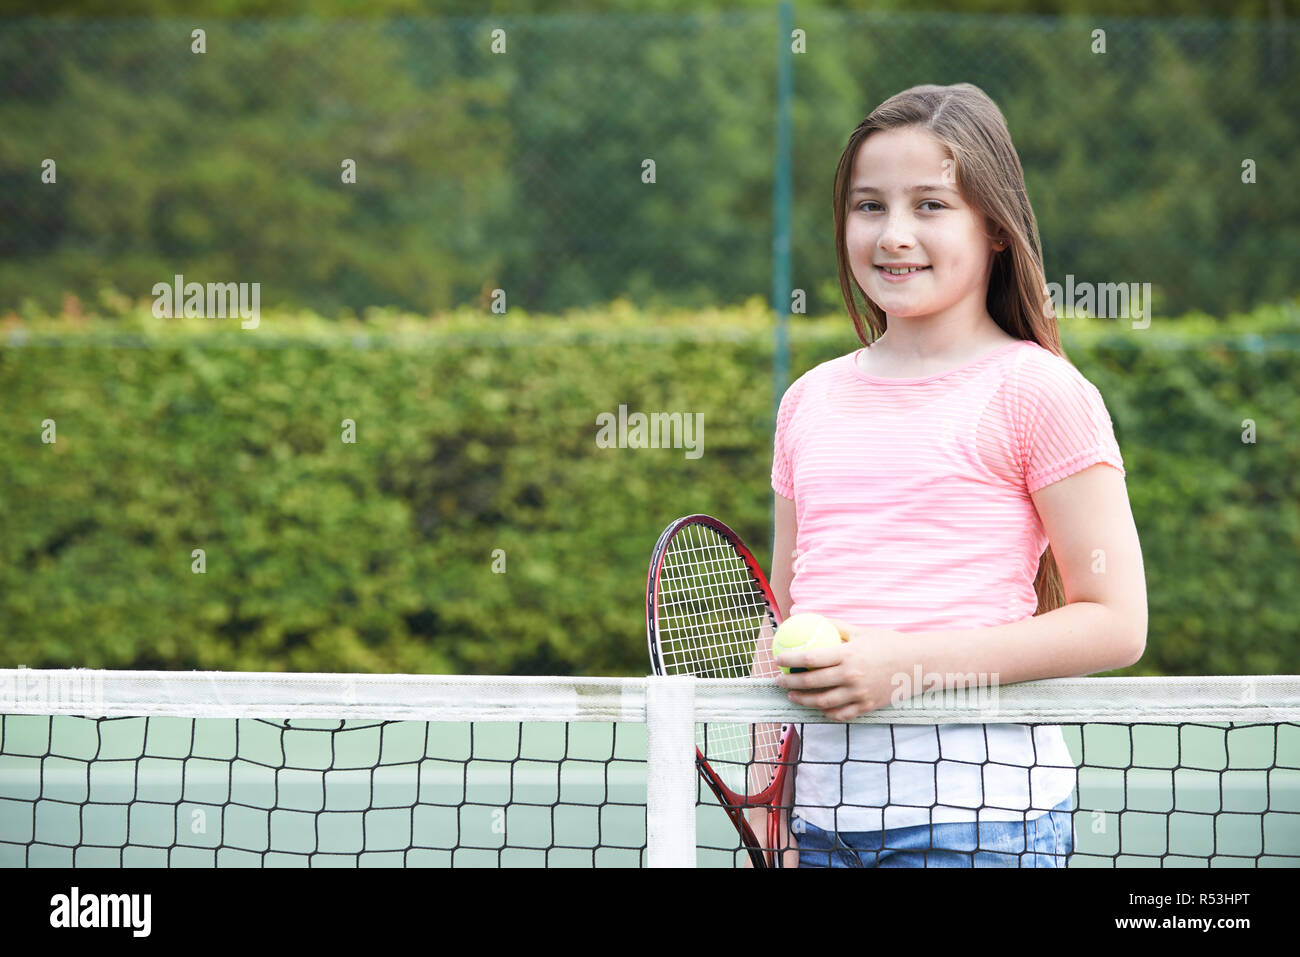 Portrait of Young Girl Playing Tennis Banque D'Images